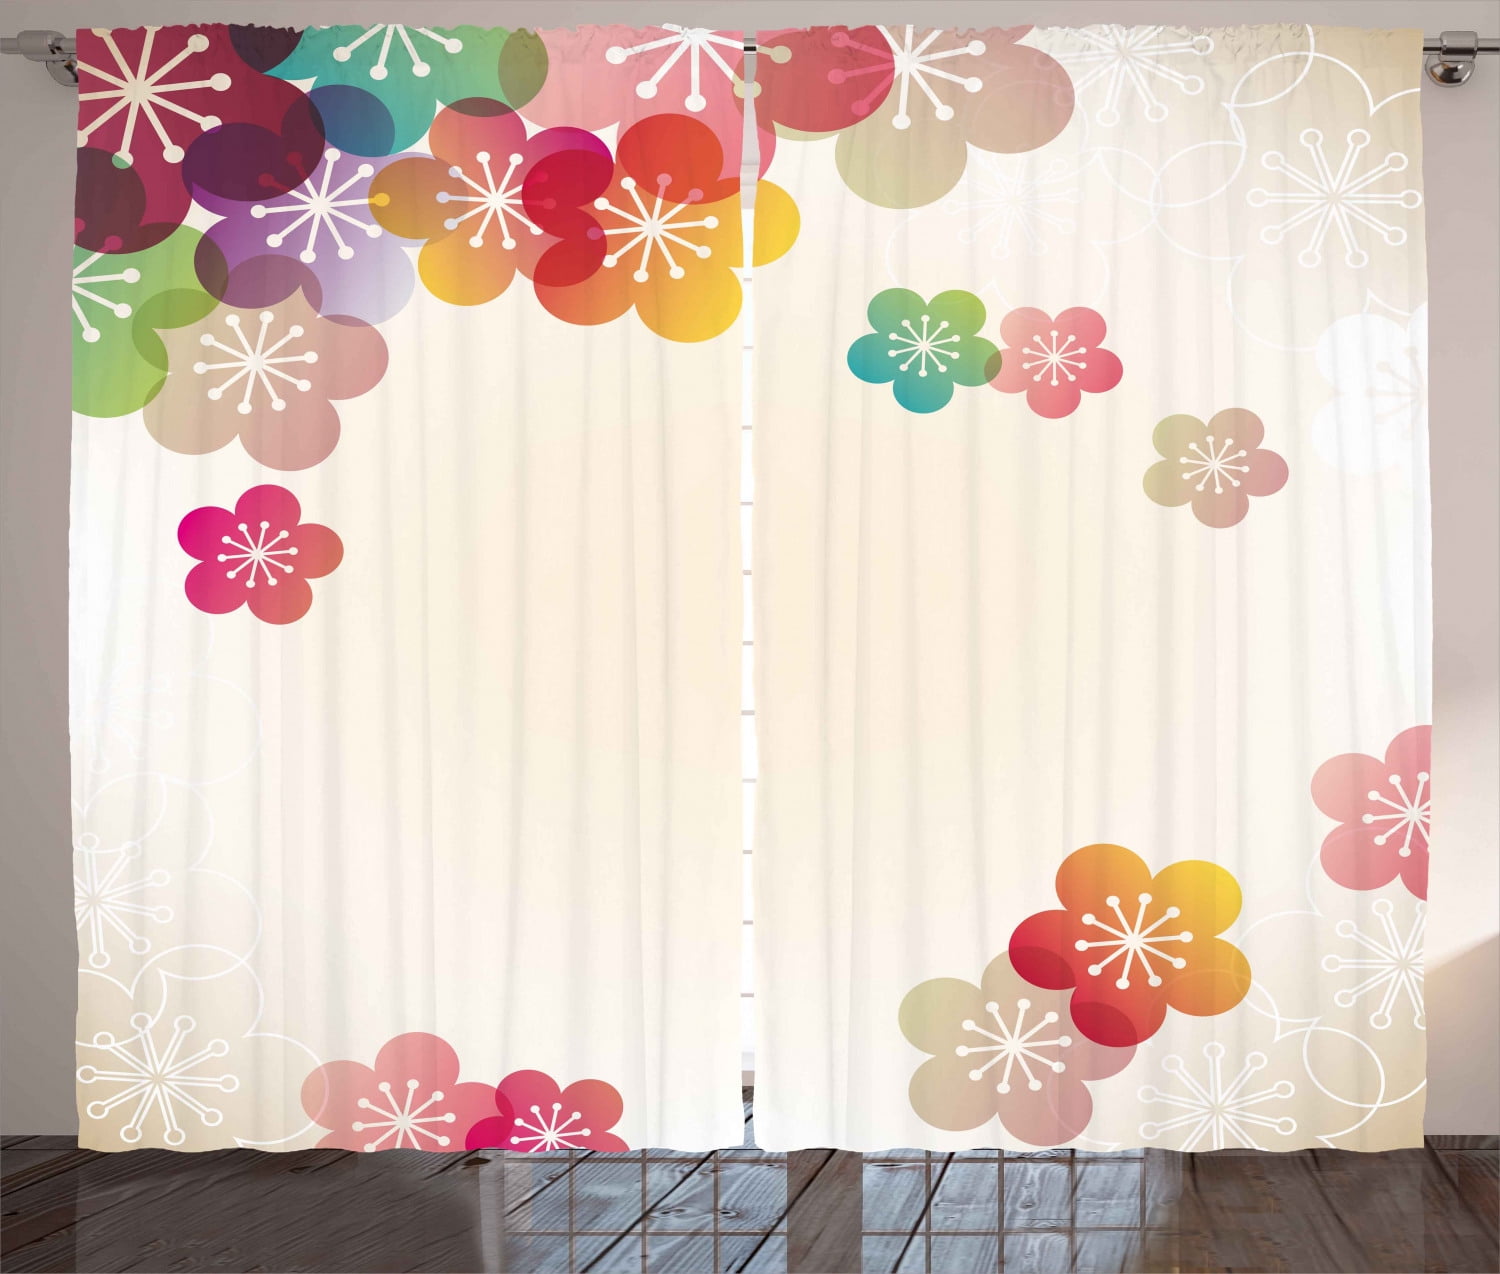 3D Trippy Curtain Flowers Wall Window Curtains Drapes for Living Room Home Decor 